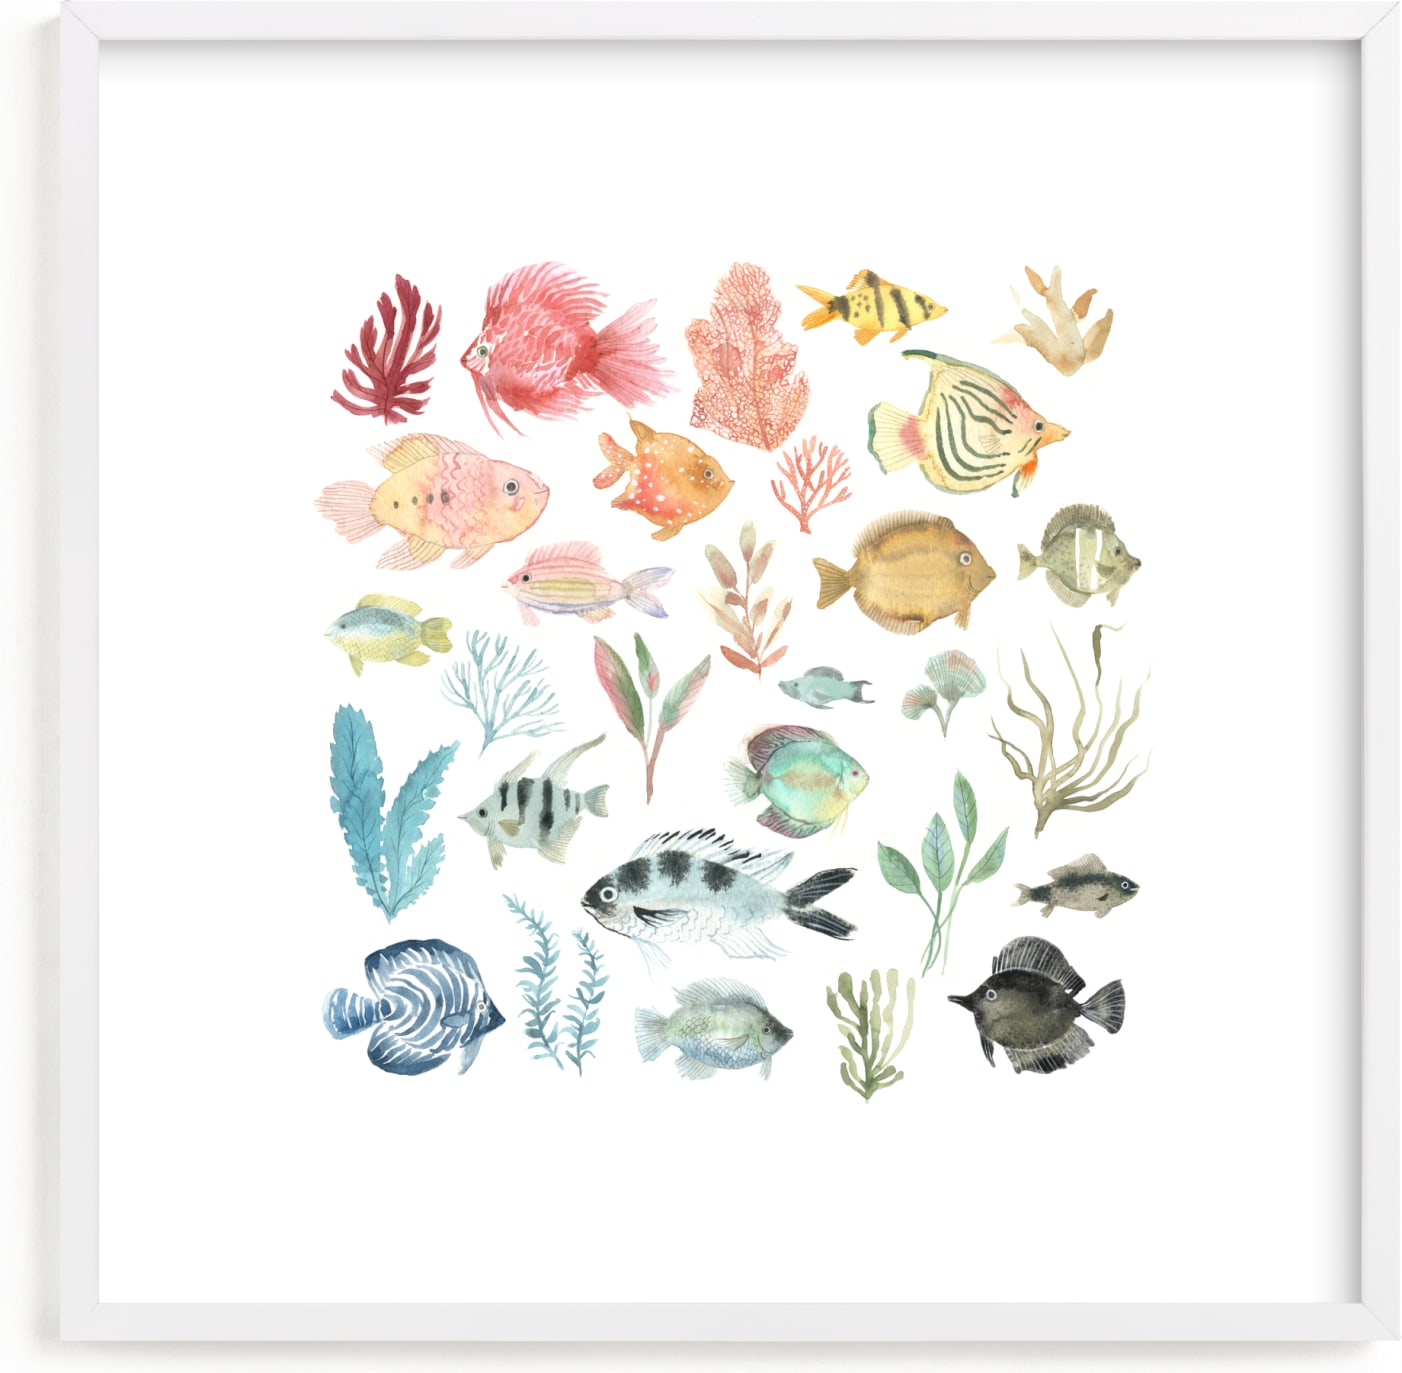 This is a colorful kids wall art by Emilie Simpson called Tropical Fish.